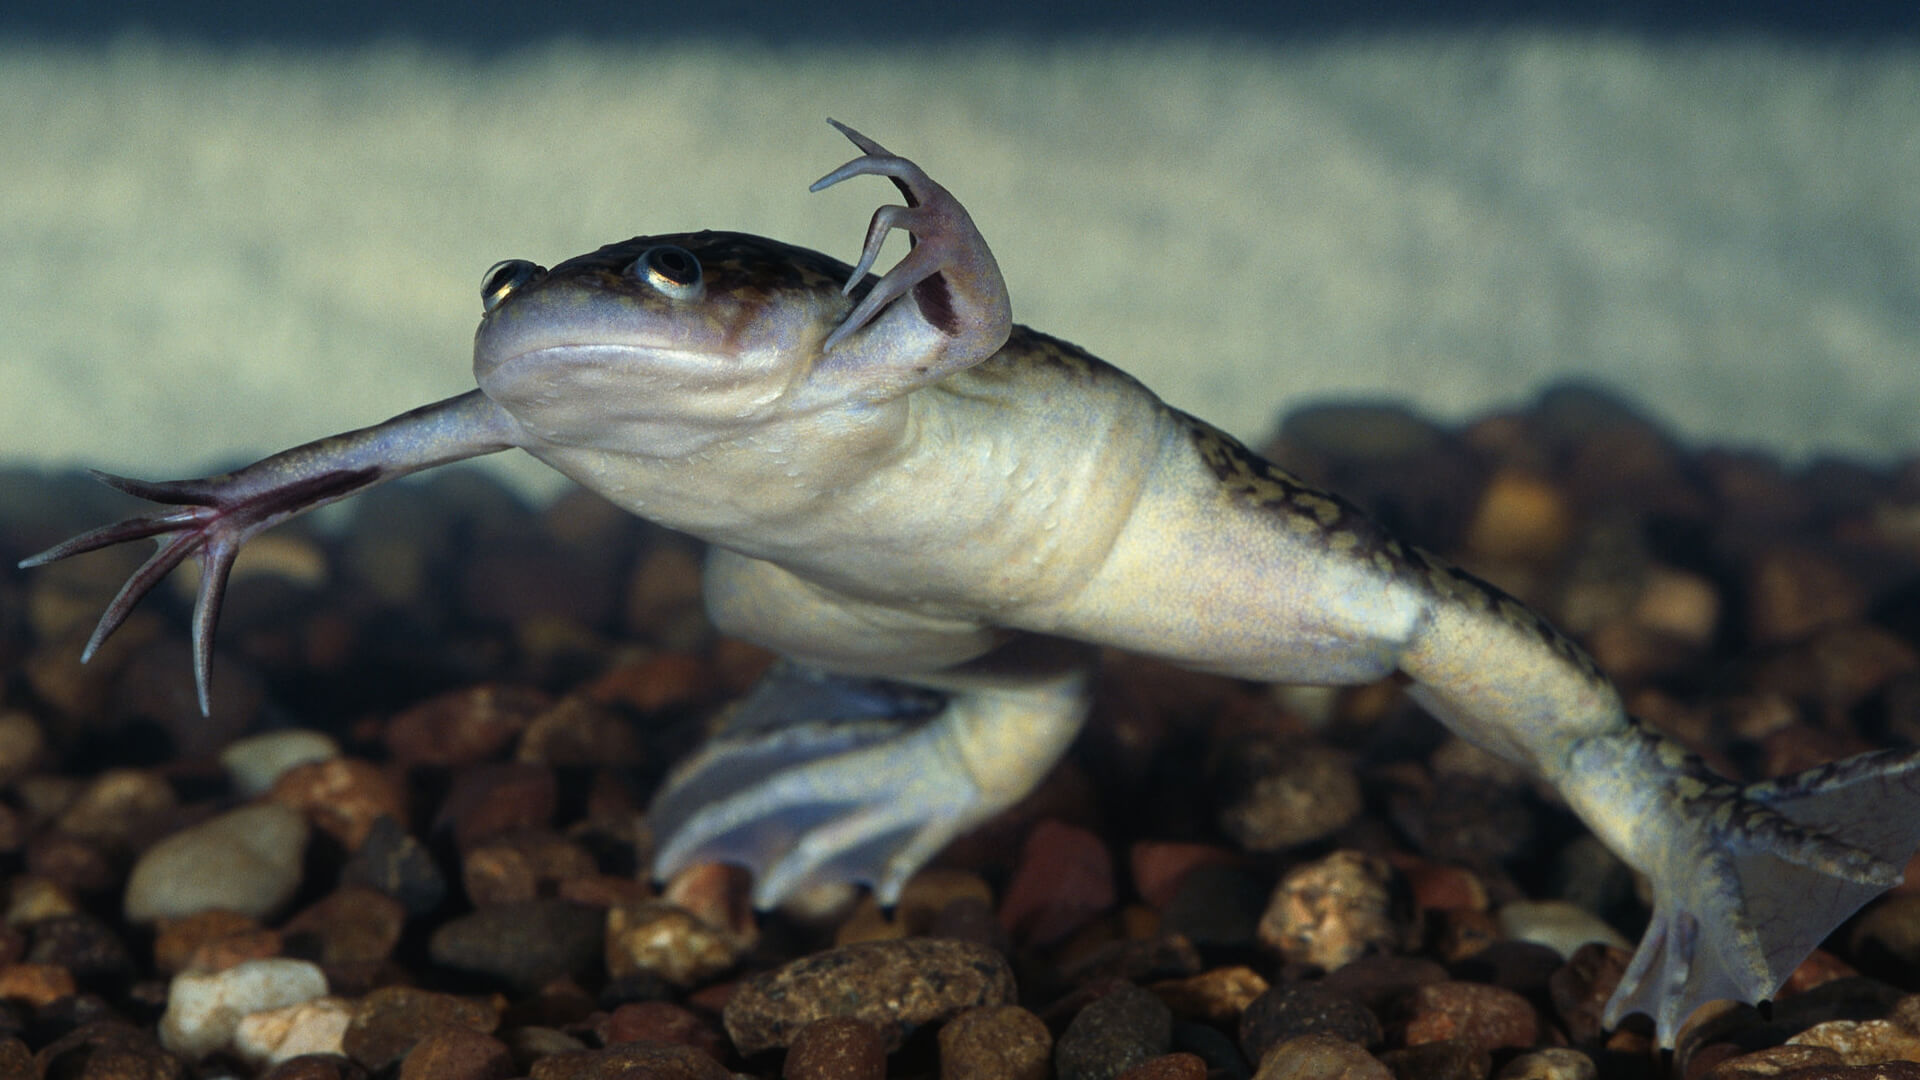 Pet African Clawed Frog Featured Image